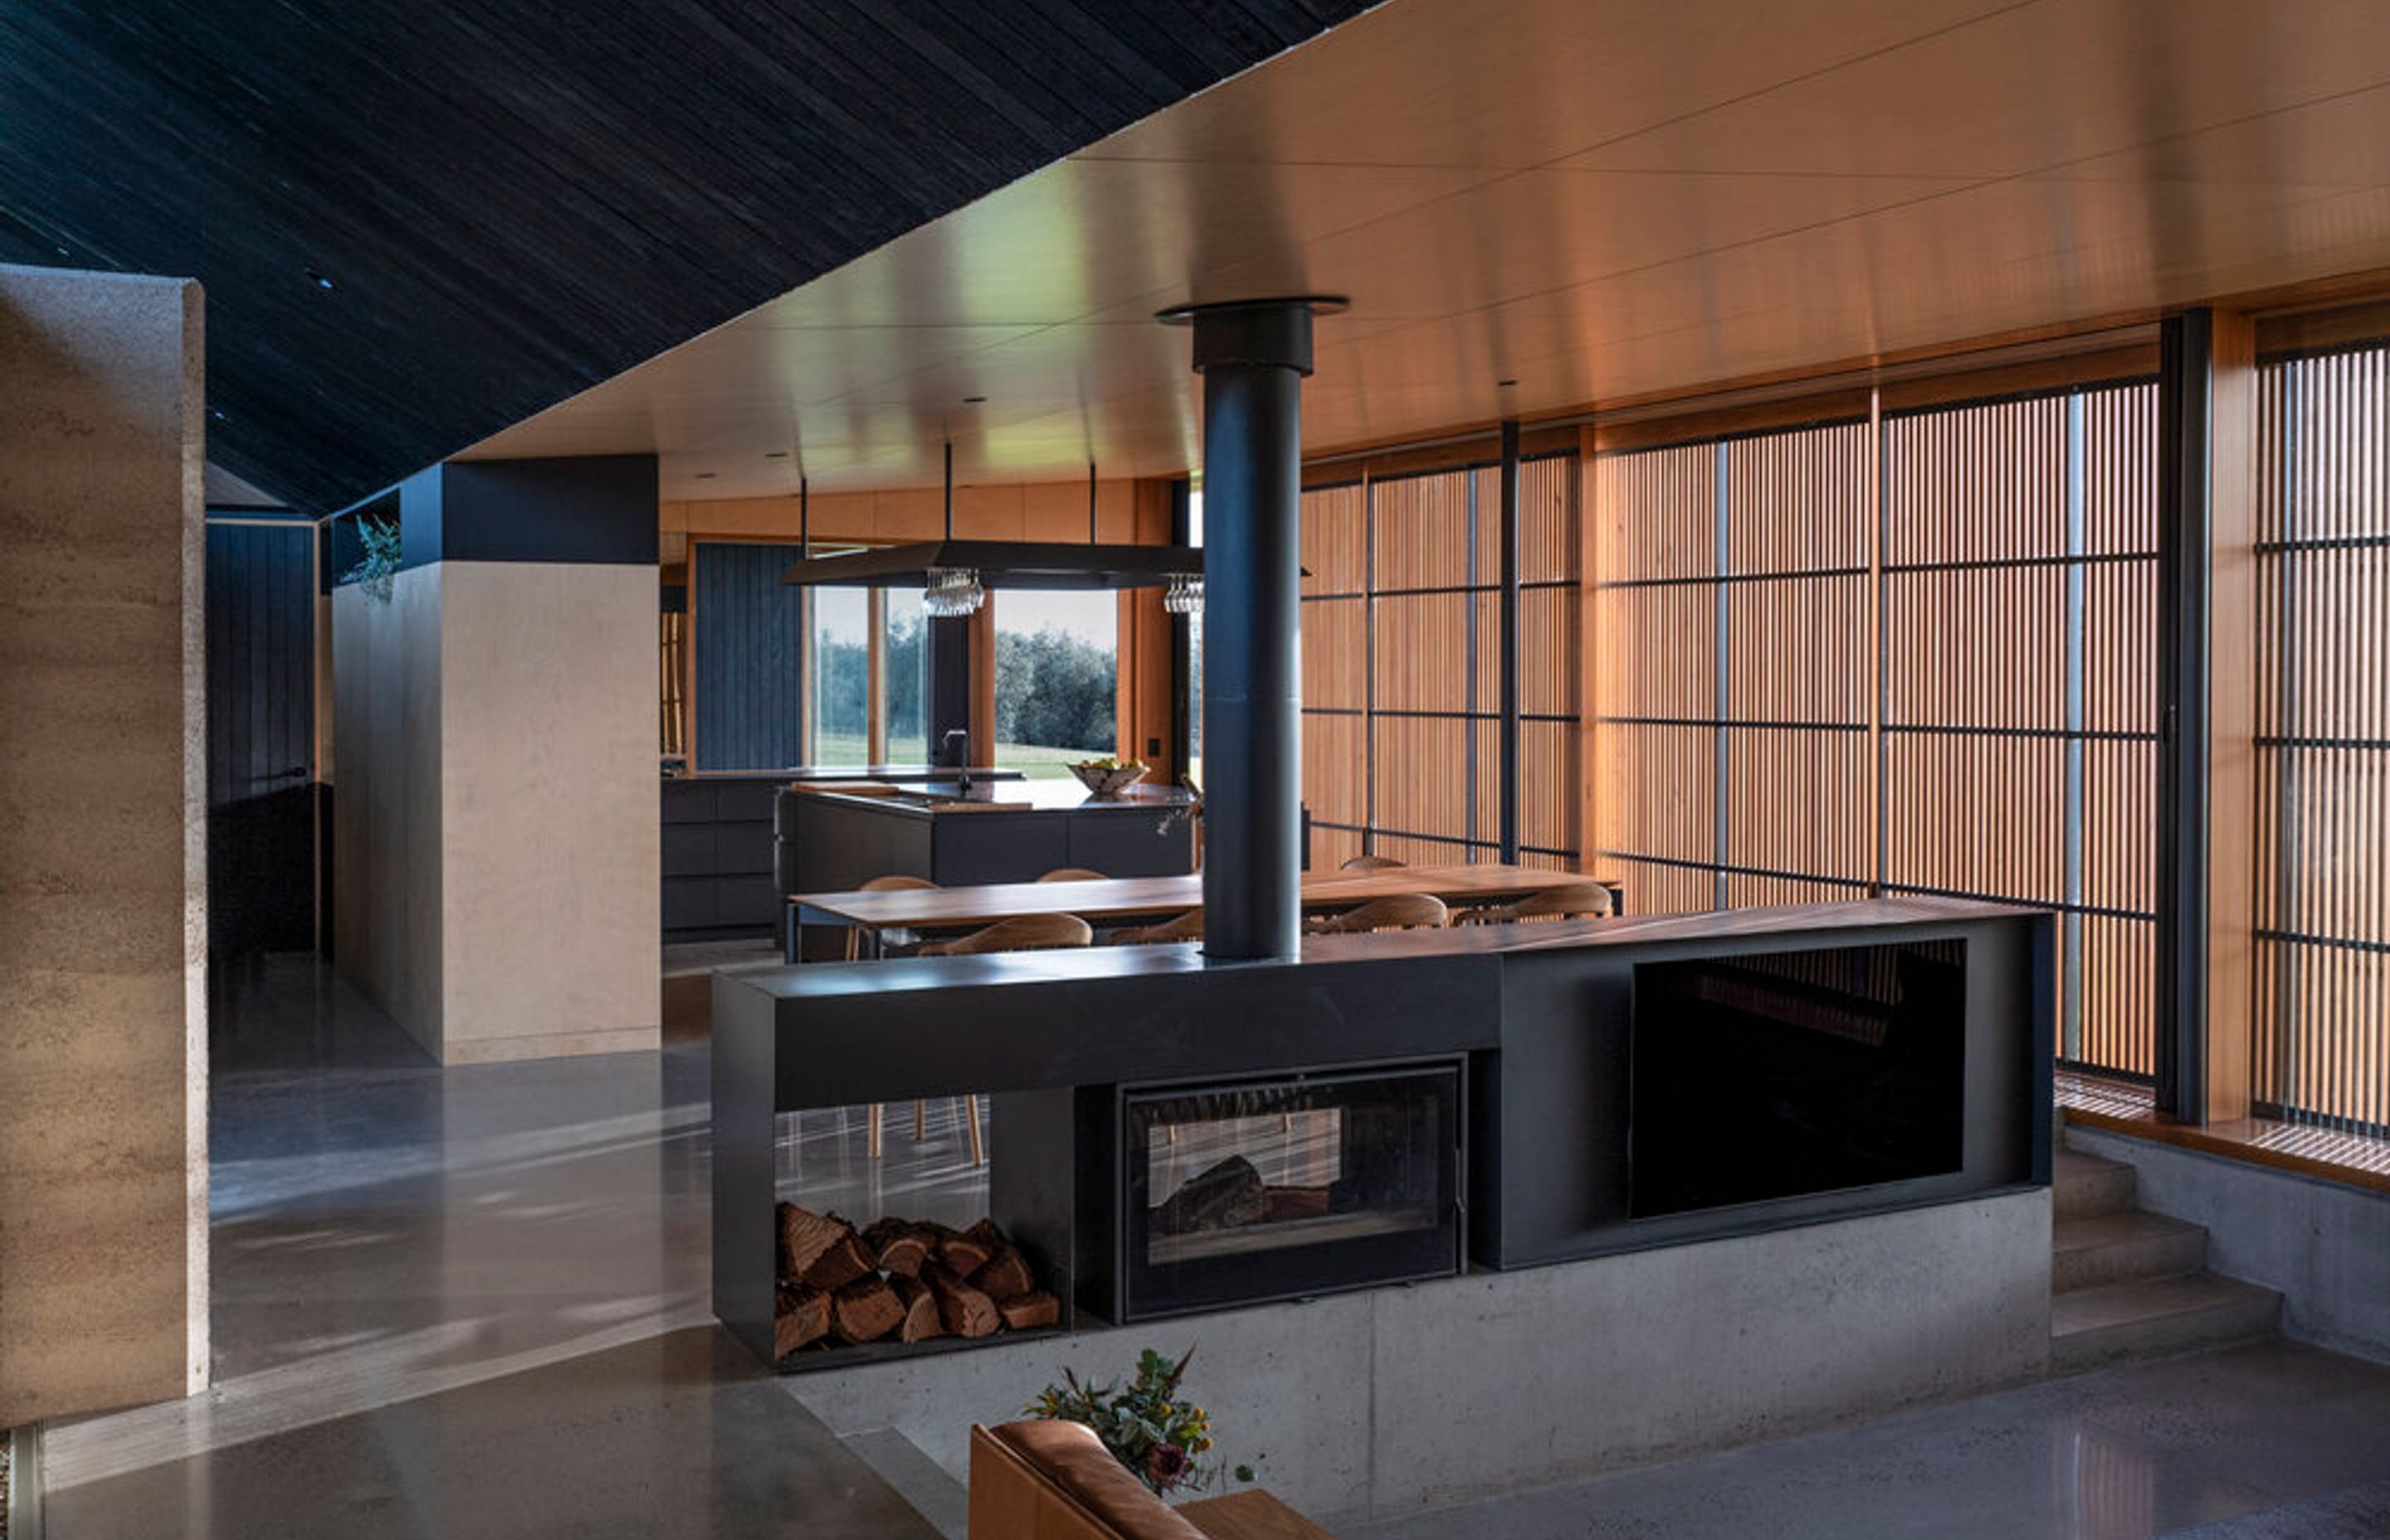 Unwind in style by the crackling fire: The mesmerizing Axis i1000 Freestanding Double Sided fireplace at Mystery Bay House creates a cozy sanctuary within the modern architectural marvel